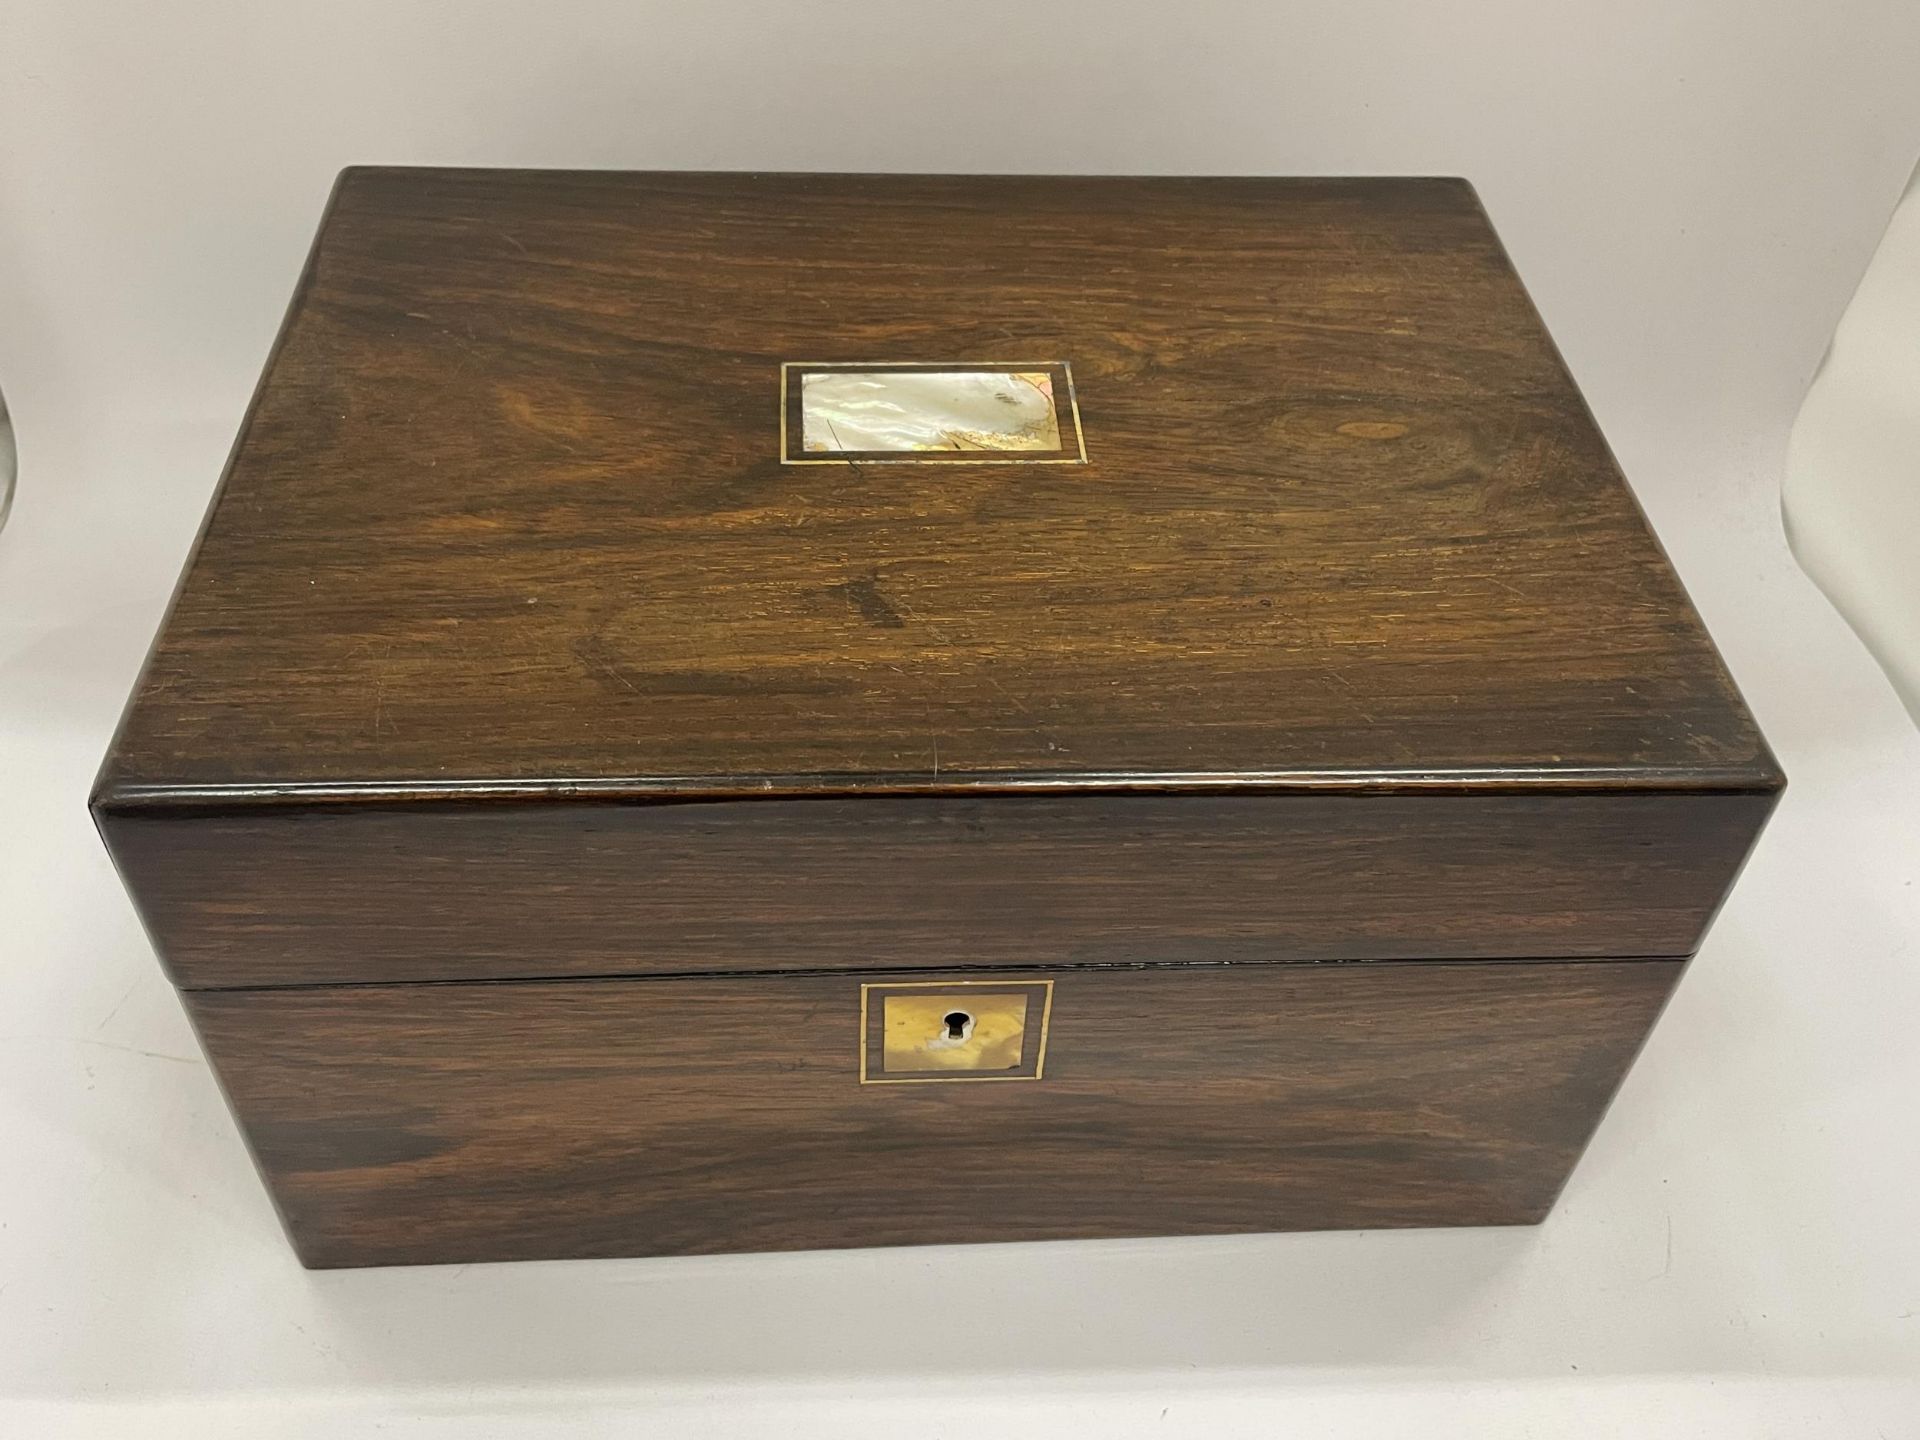 A VICTORIAN ROSEWOOD JEWELLERY BOX WITH MOTHER OF PEARL DESIGN & RED SILK INTERIOR AND SECRET SIDE